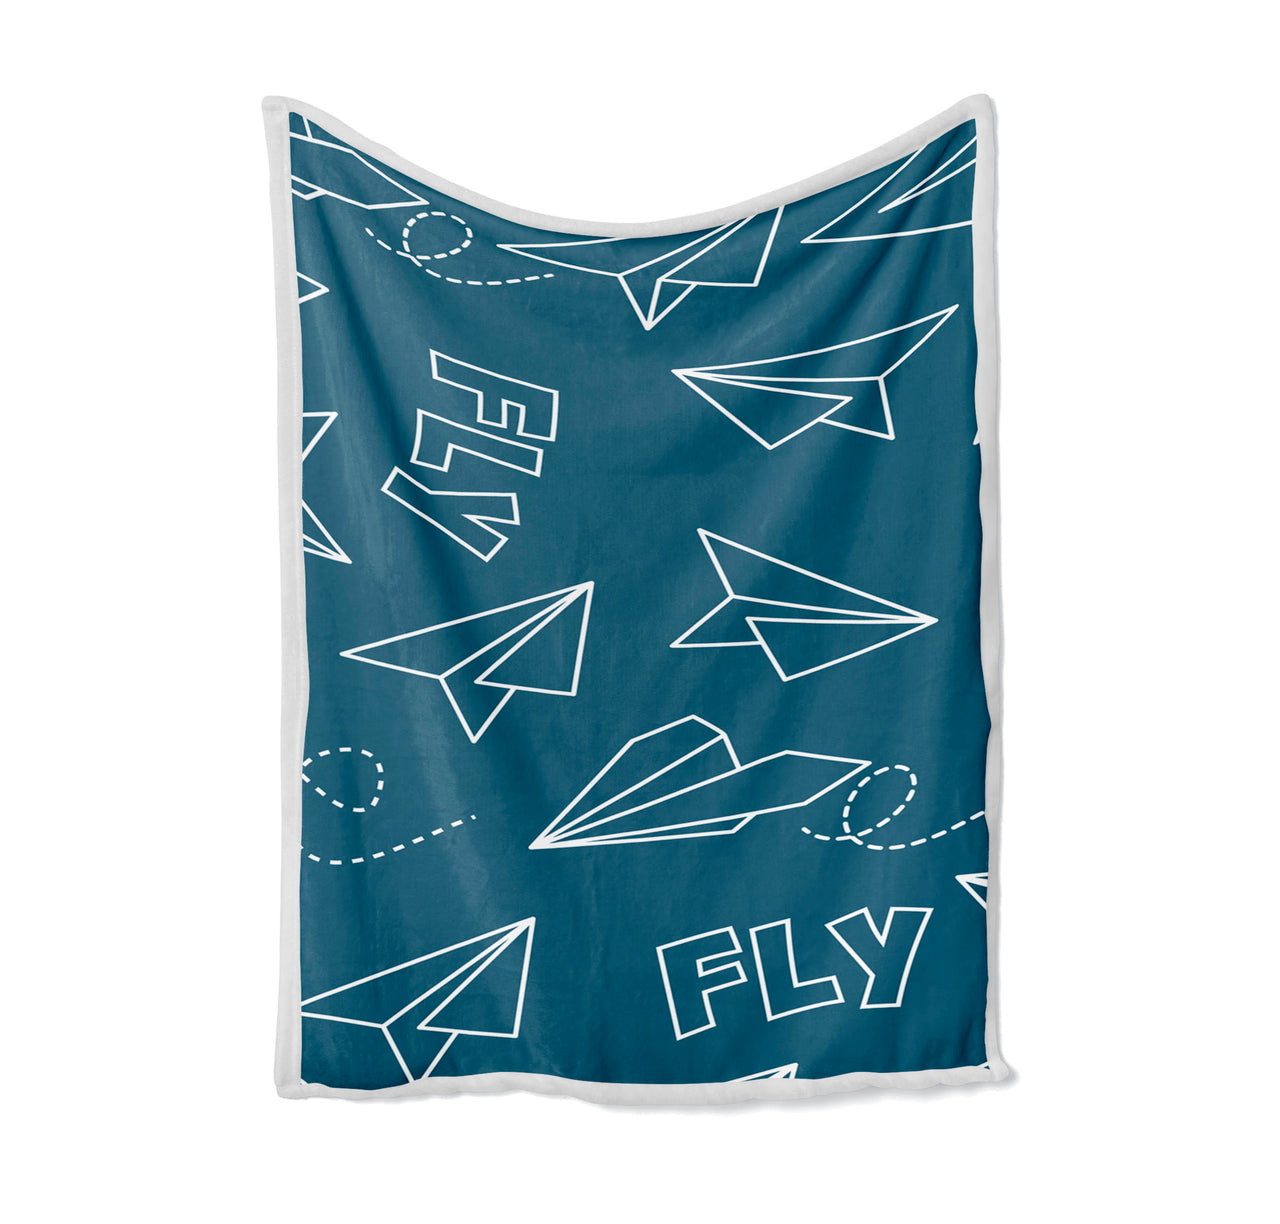 Paper Airplane & Fly-Green Designed Bed Blankets & Covers